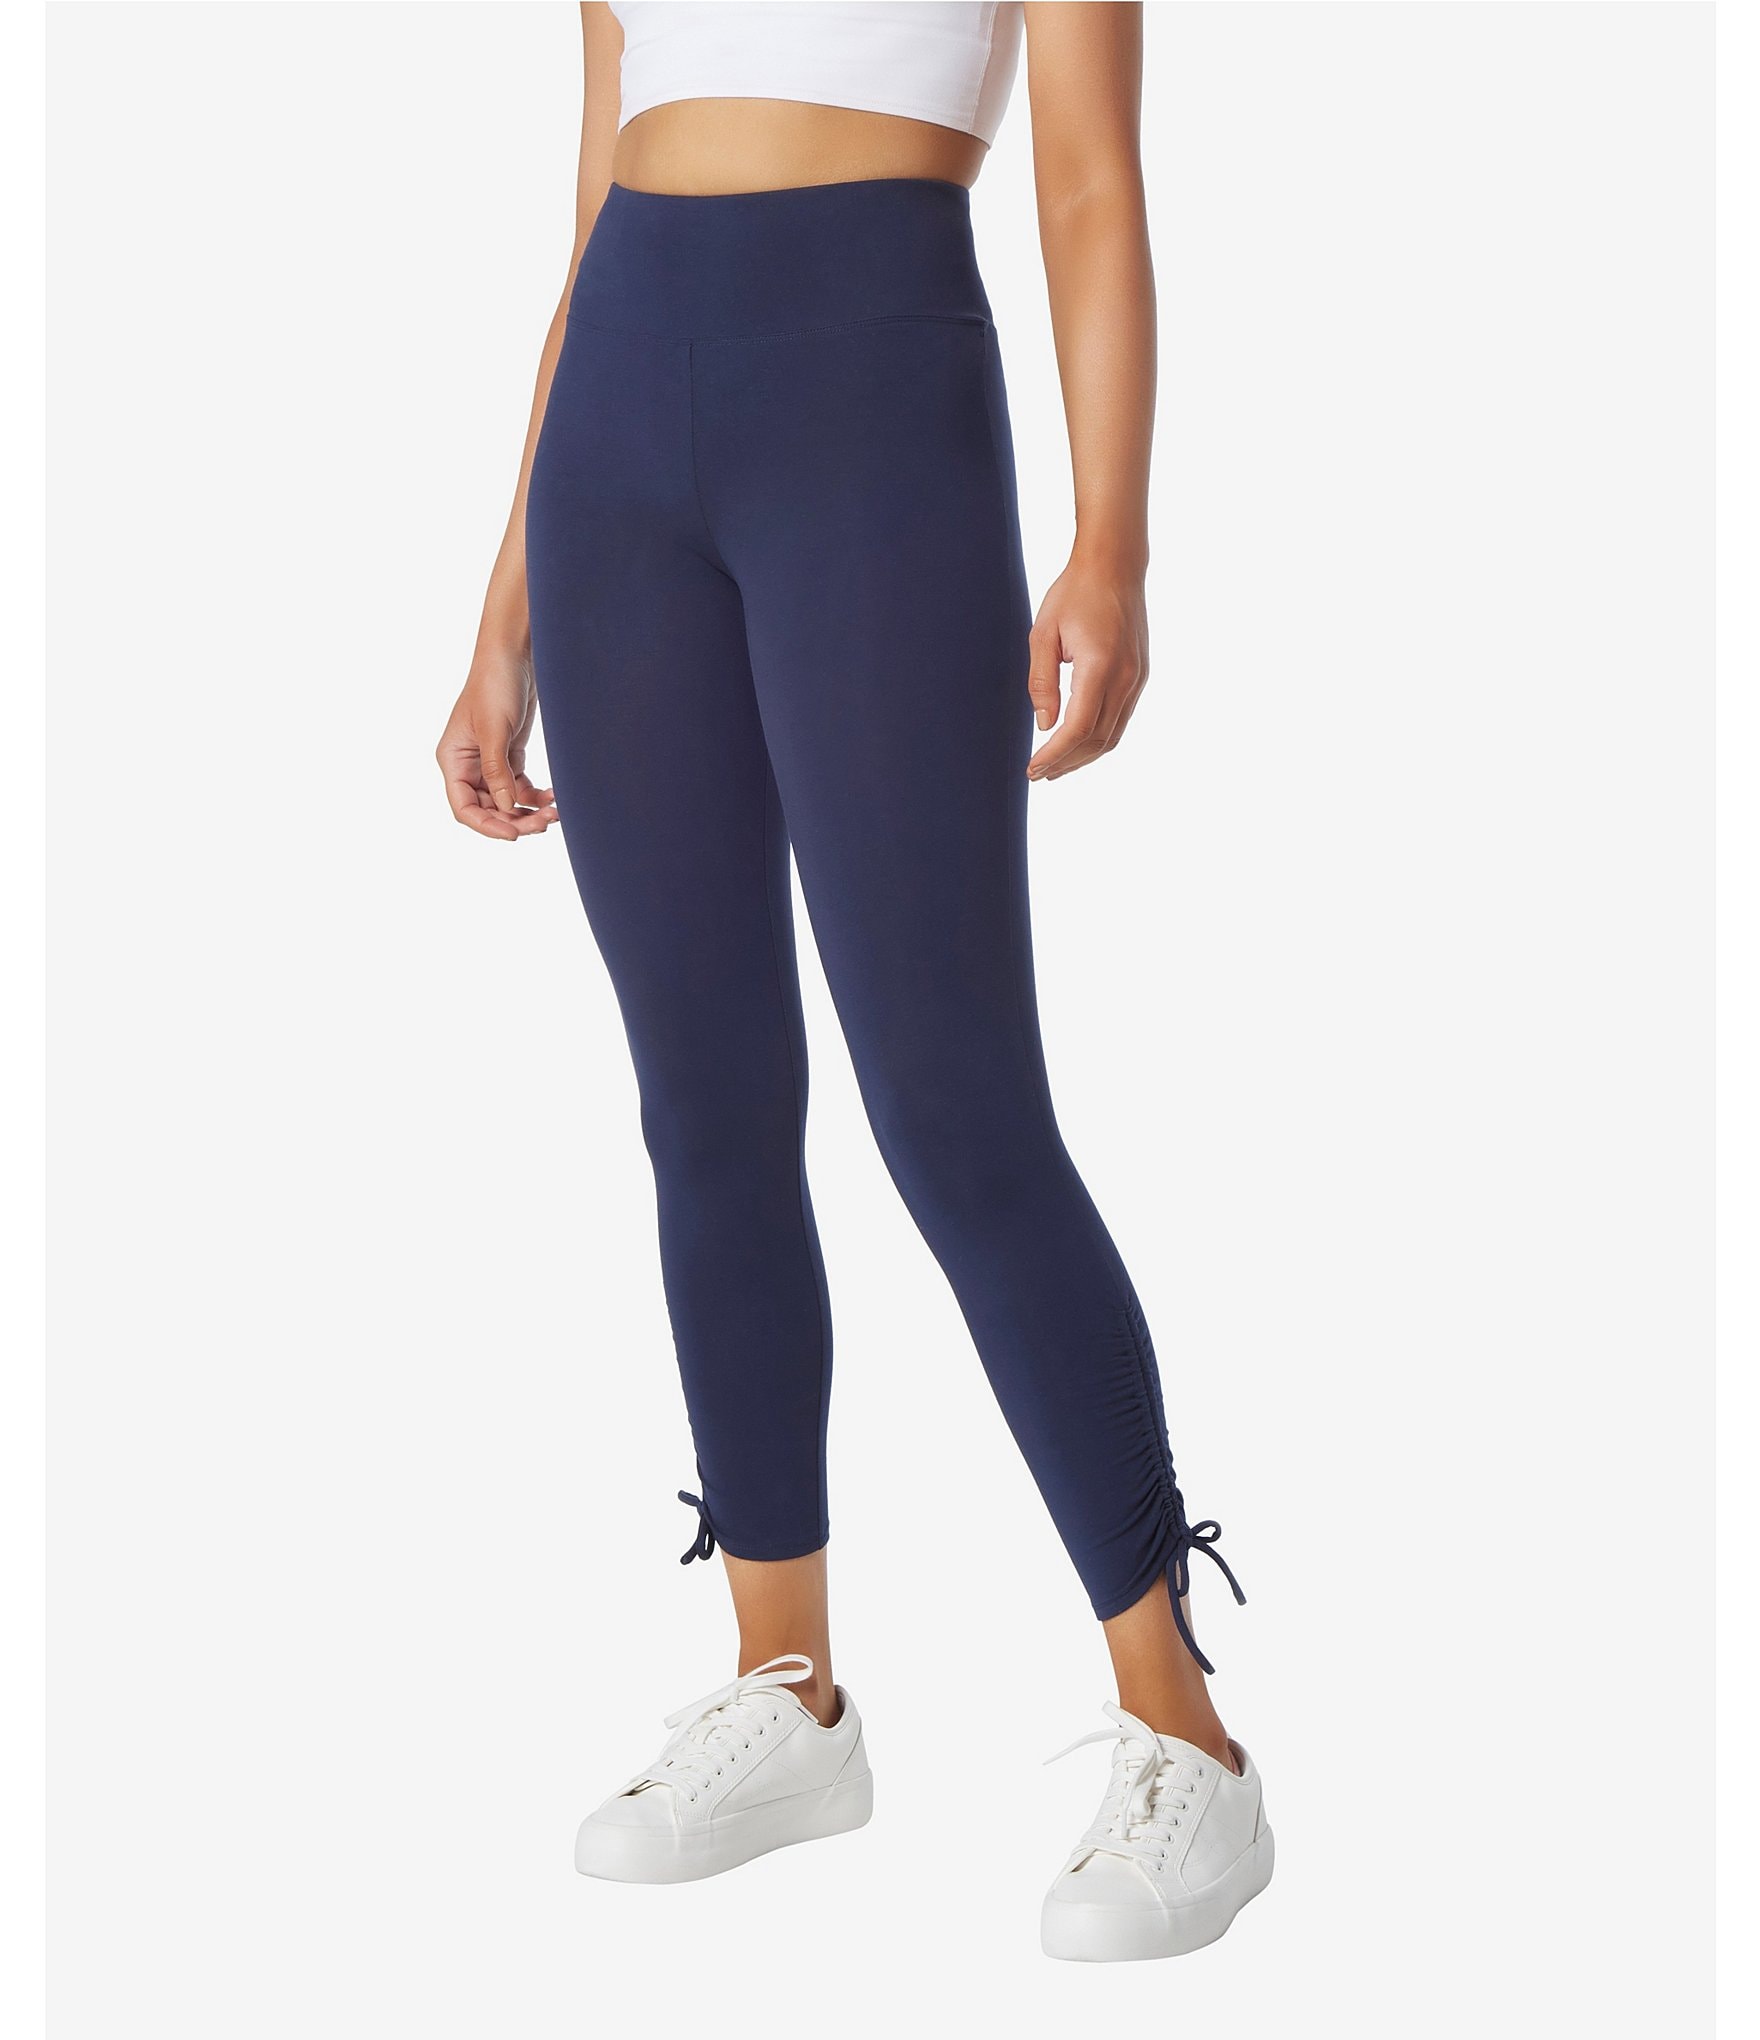 https://dimg.dillards.com/is/image/DillardsZoom/zoom/andrew-marc-sport-stretch-high-waisted-ankle-ruched-hem-pull-on-leggings/00000000_zi_768aabe8-7c65-468f-9f87-130602d2f5ef.jpg